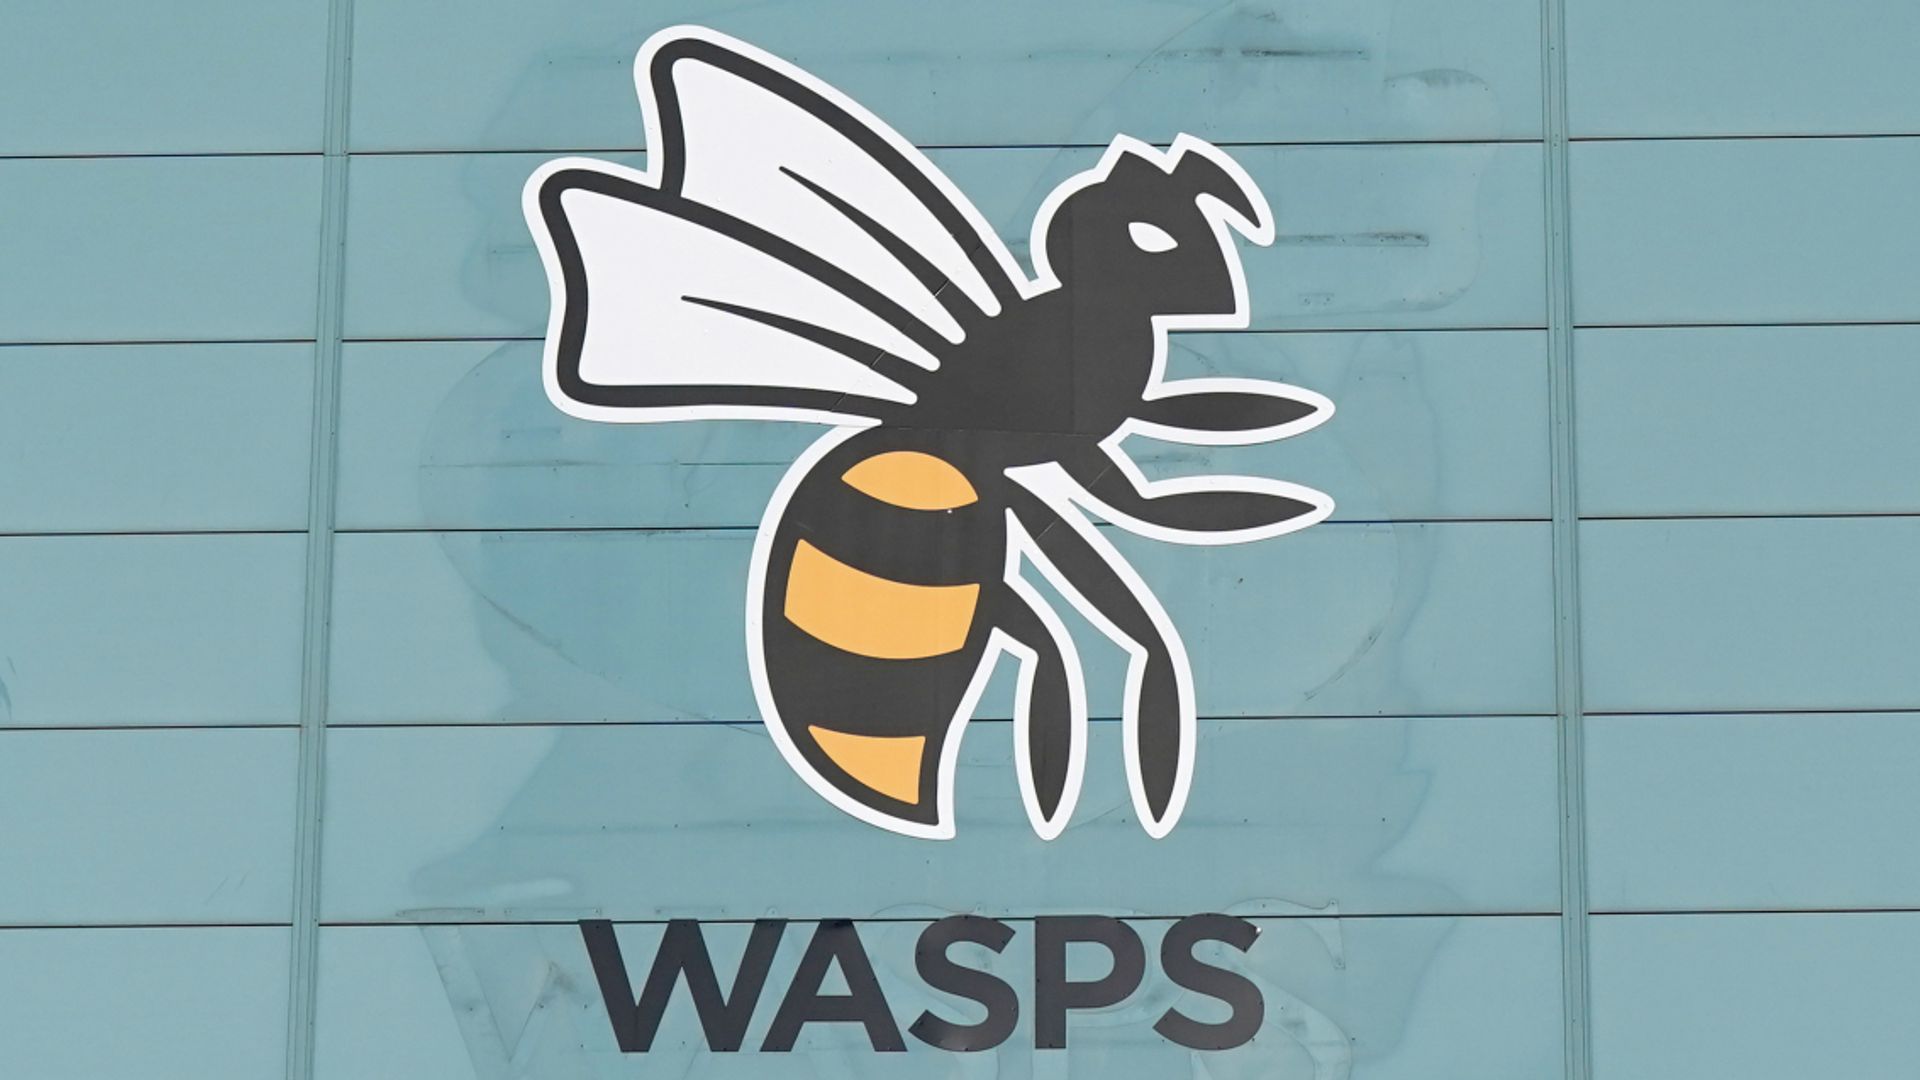 Wasps announce plan to move to new stadium in Kent